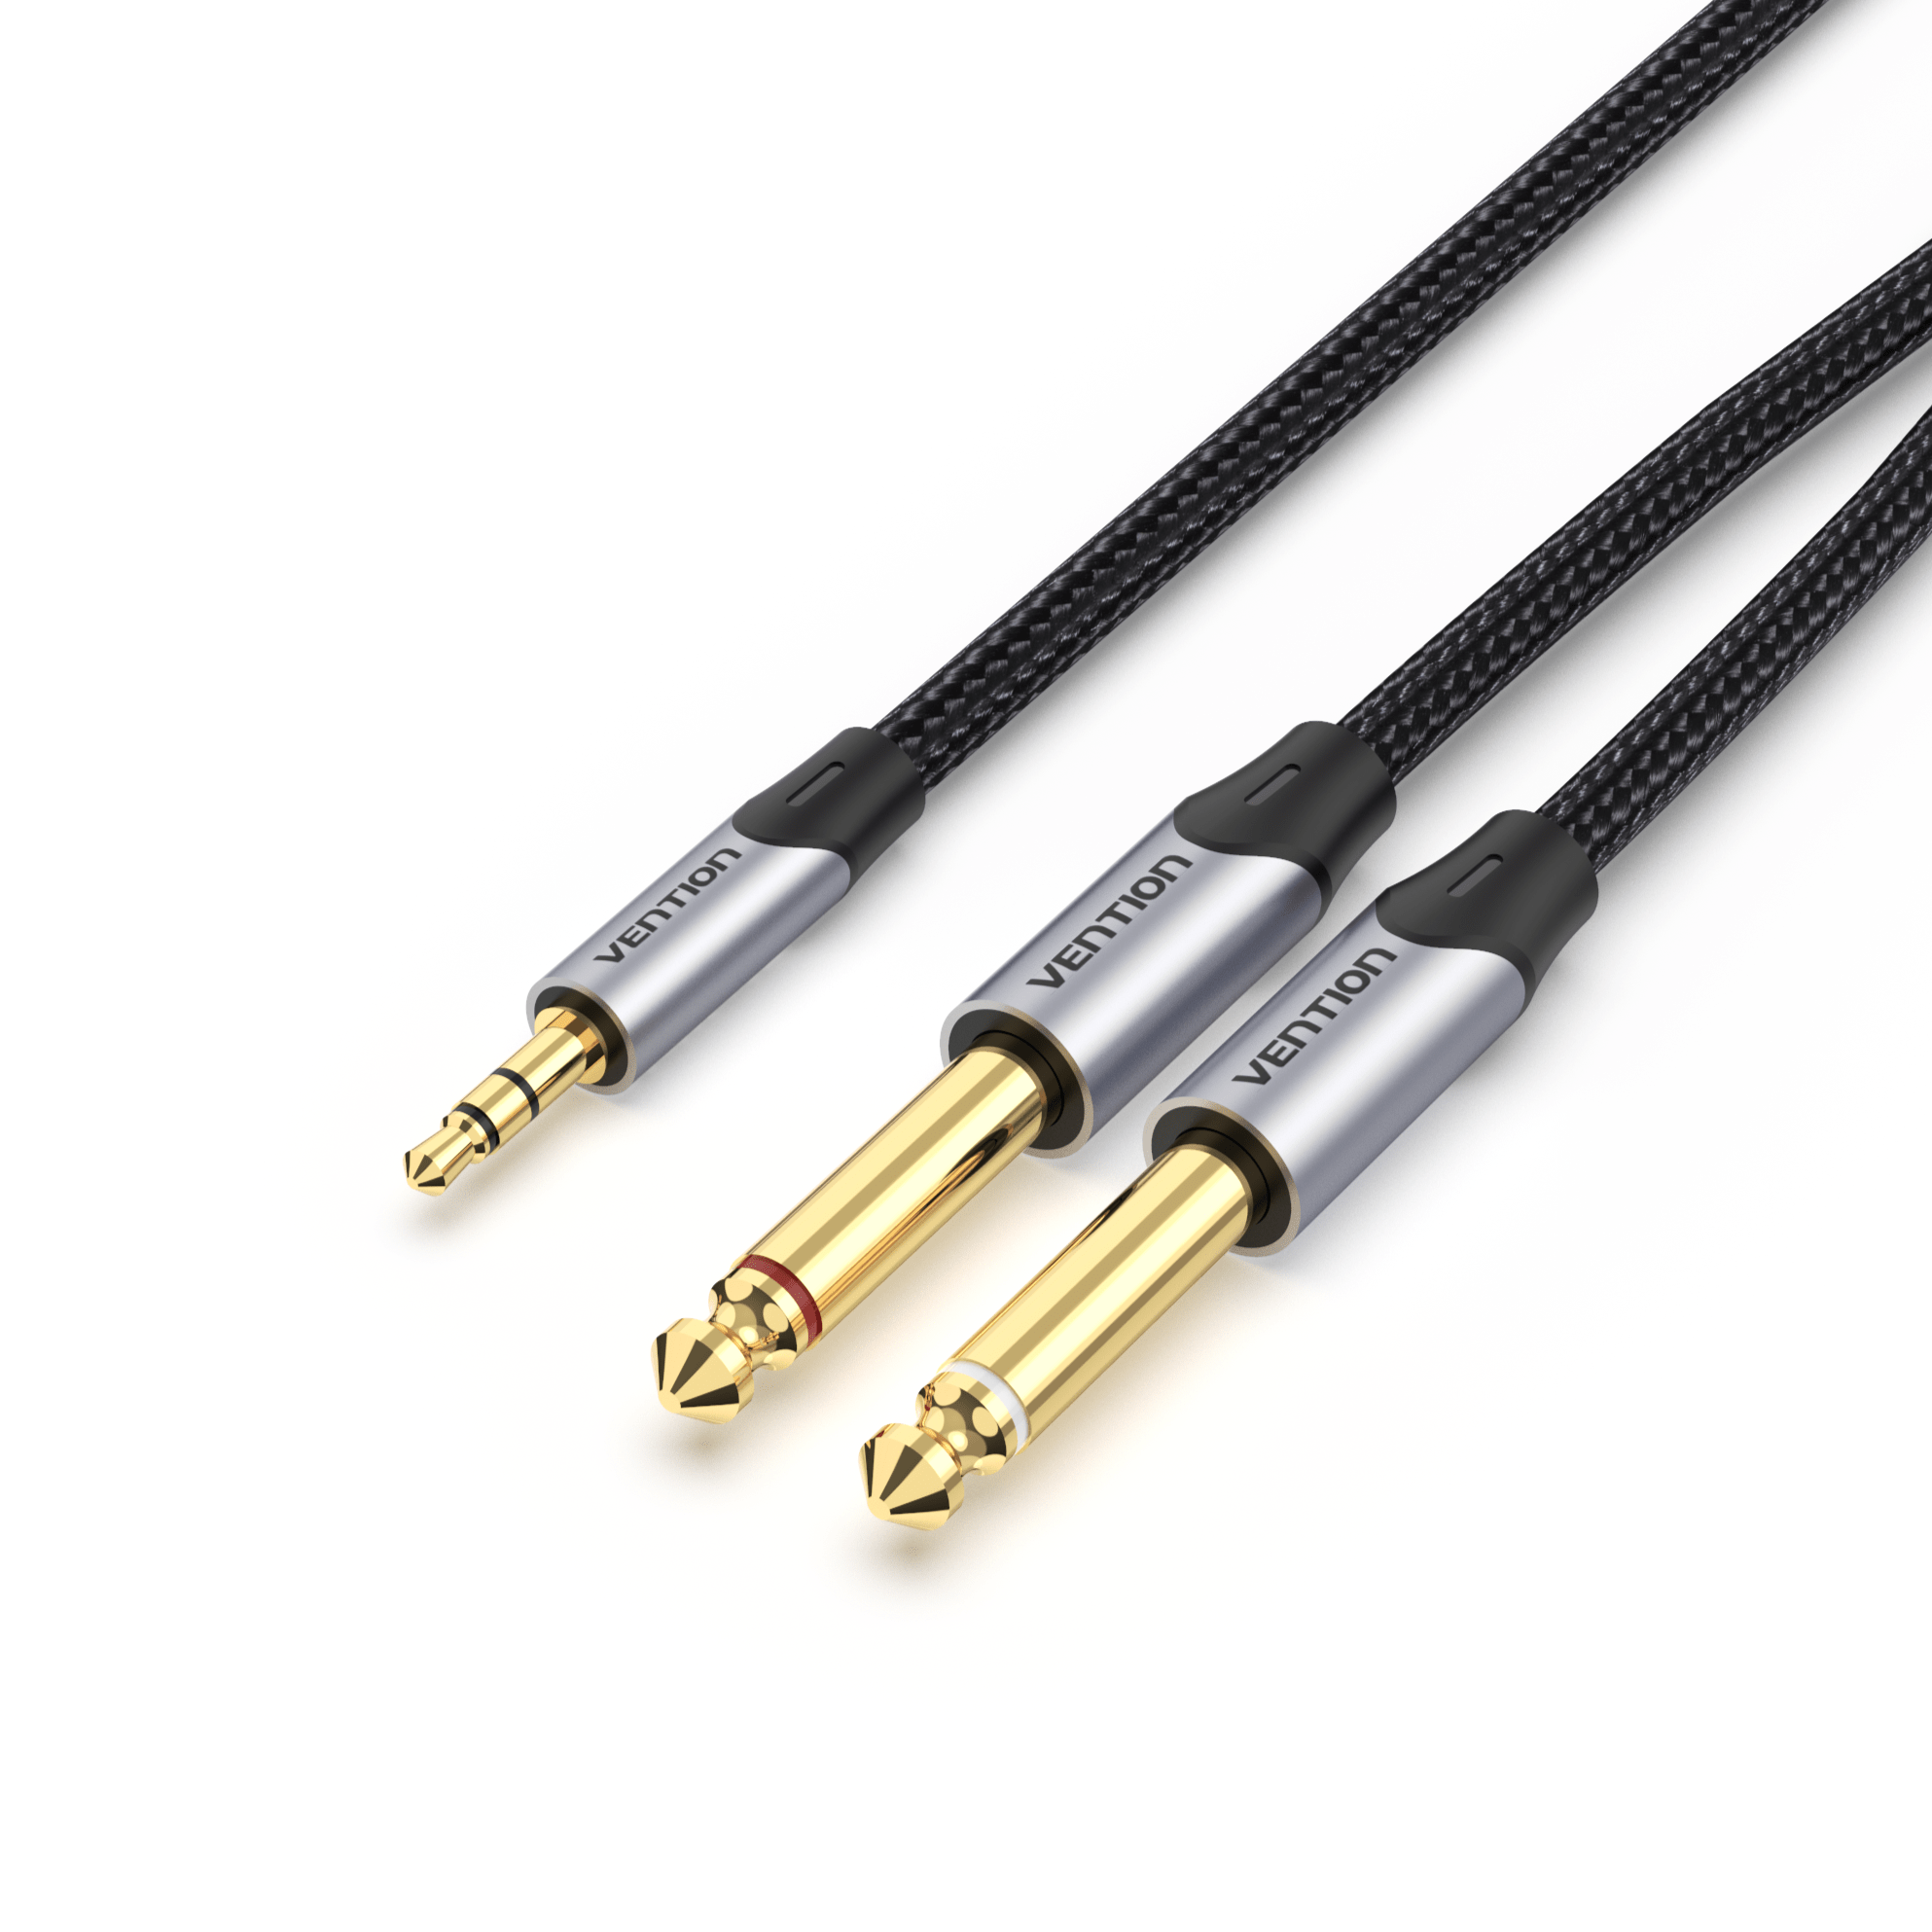 3.5 to 2.5 Aux Cable Jack 3.5 mm to Jack 2.5 mm Audio Cable Jack 3.5 for  Headphone Aux Speaker Connector Cord 2.5 to 3.5